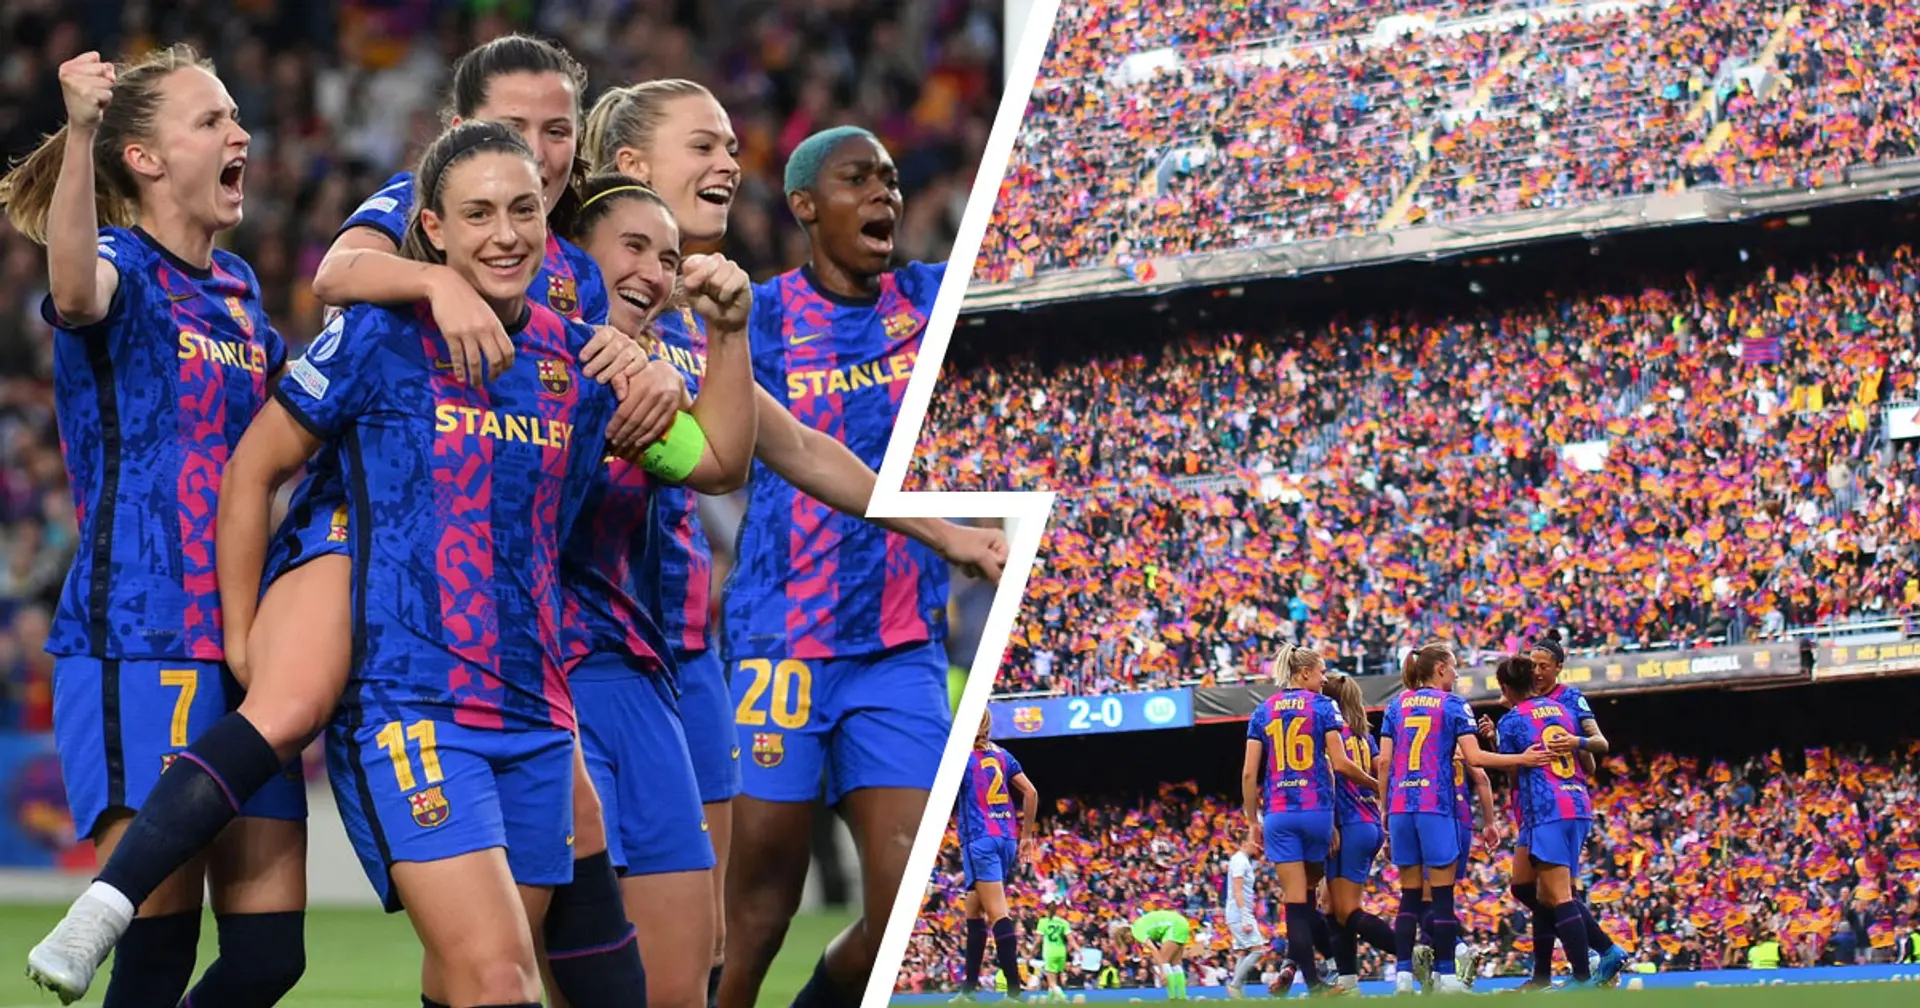 Barcelona and Wolfsburg's Women's Champions League match breaks all-time attendance record